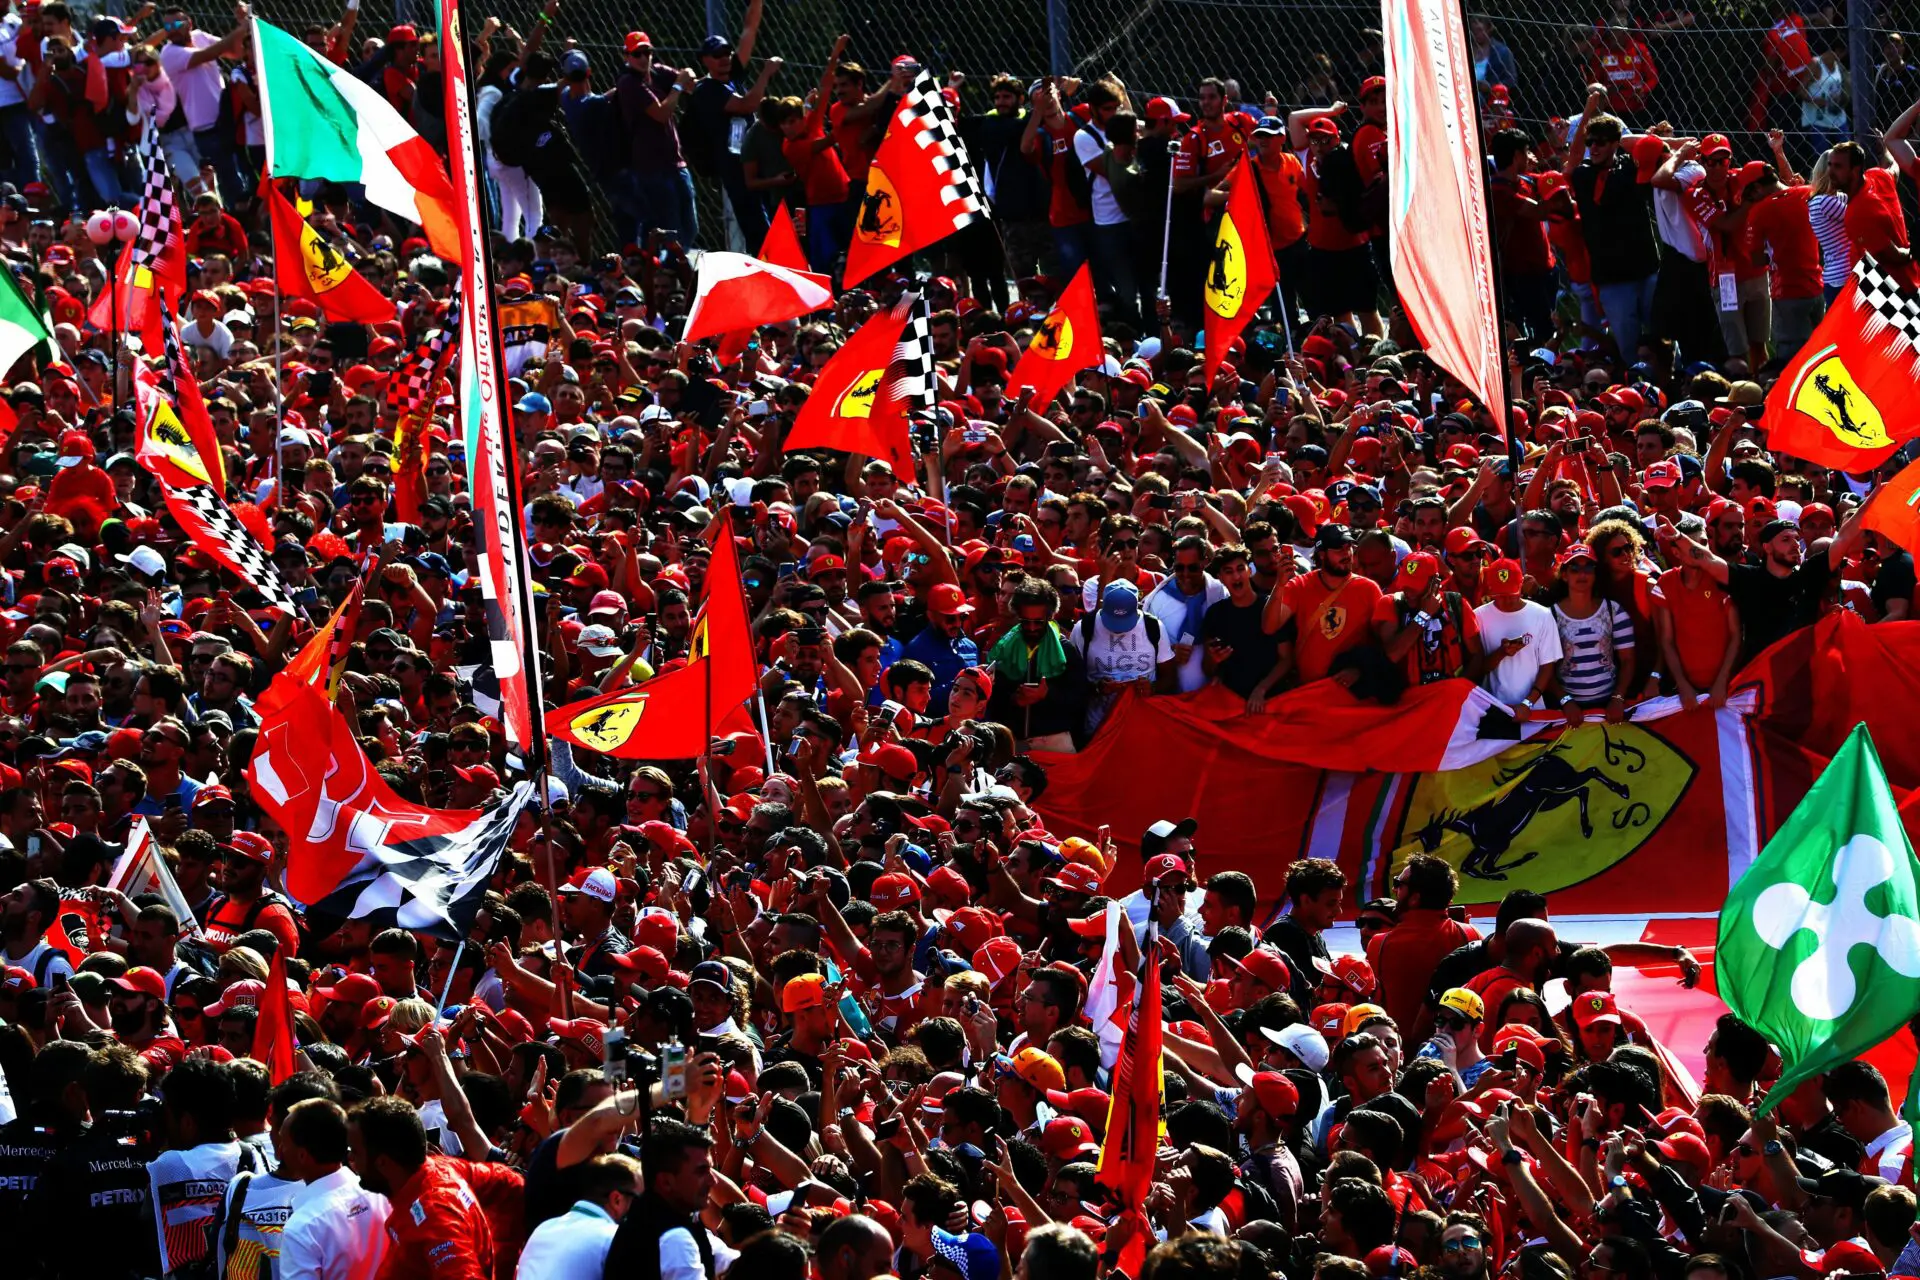 F1 Crowds gathering in the granstand supporting ferrari